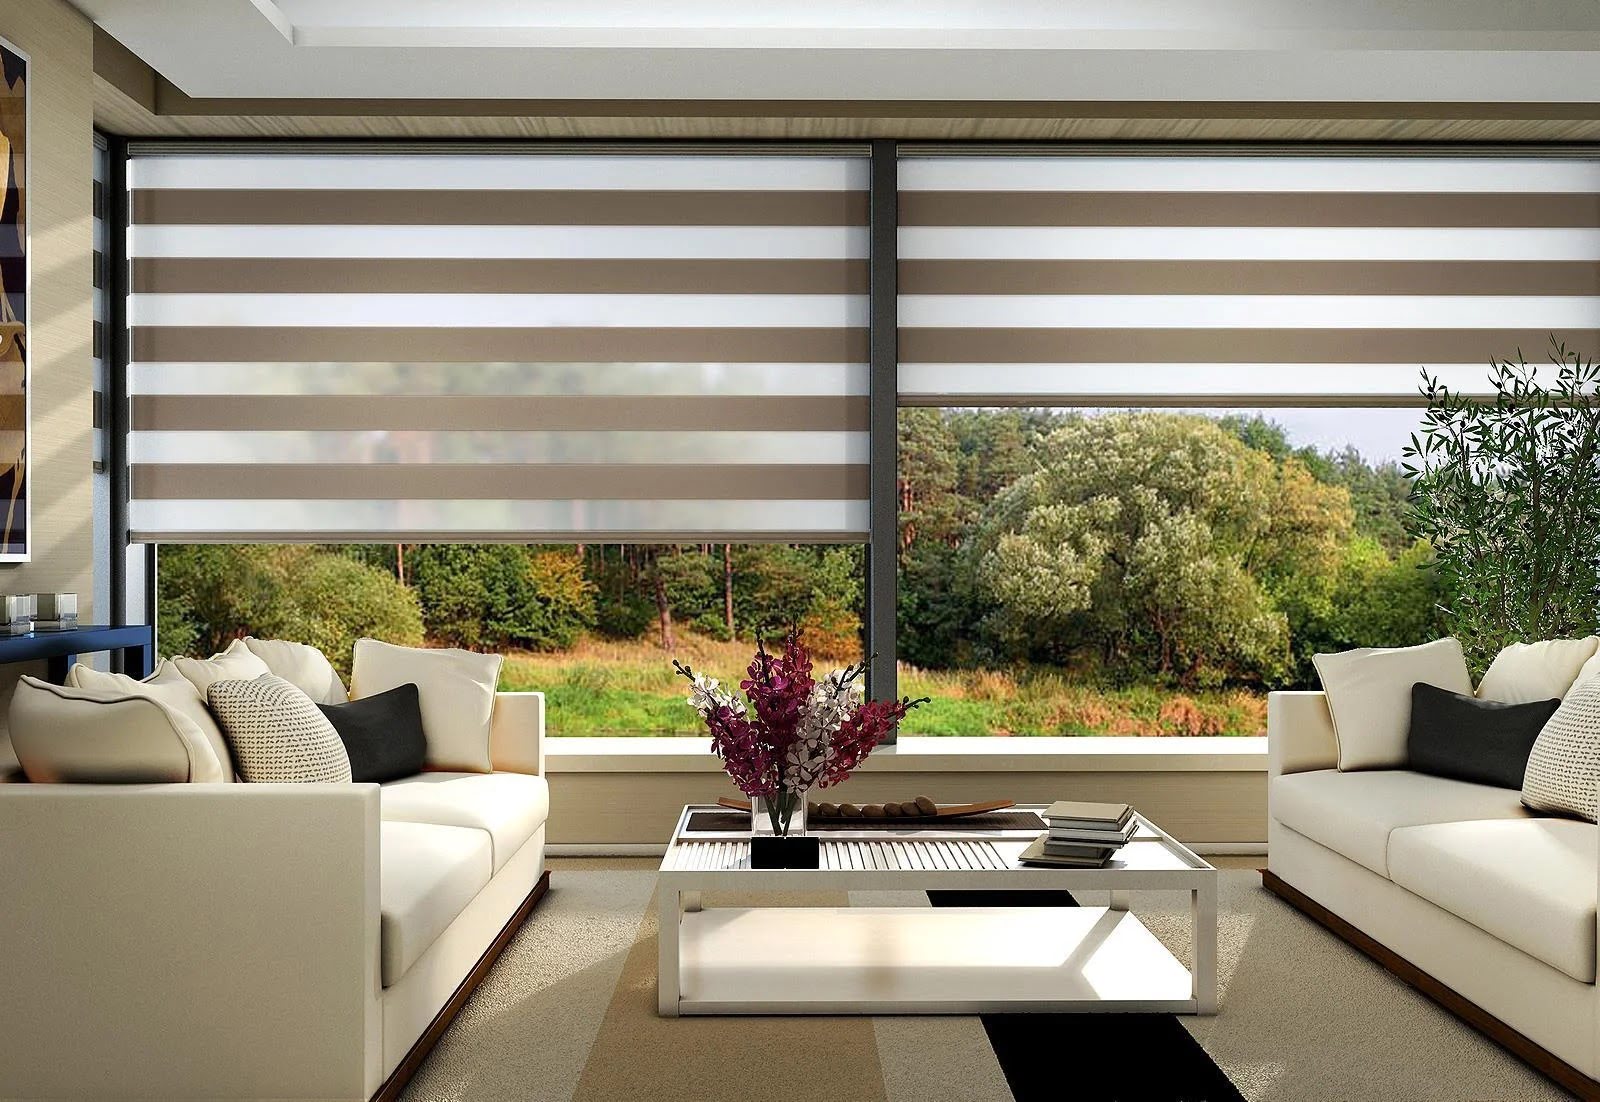 What Should I Consider When Selecting Motorized Blinds